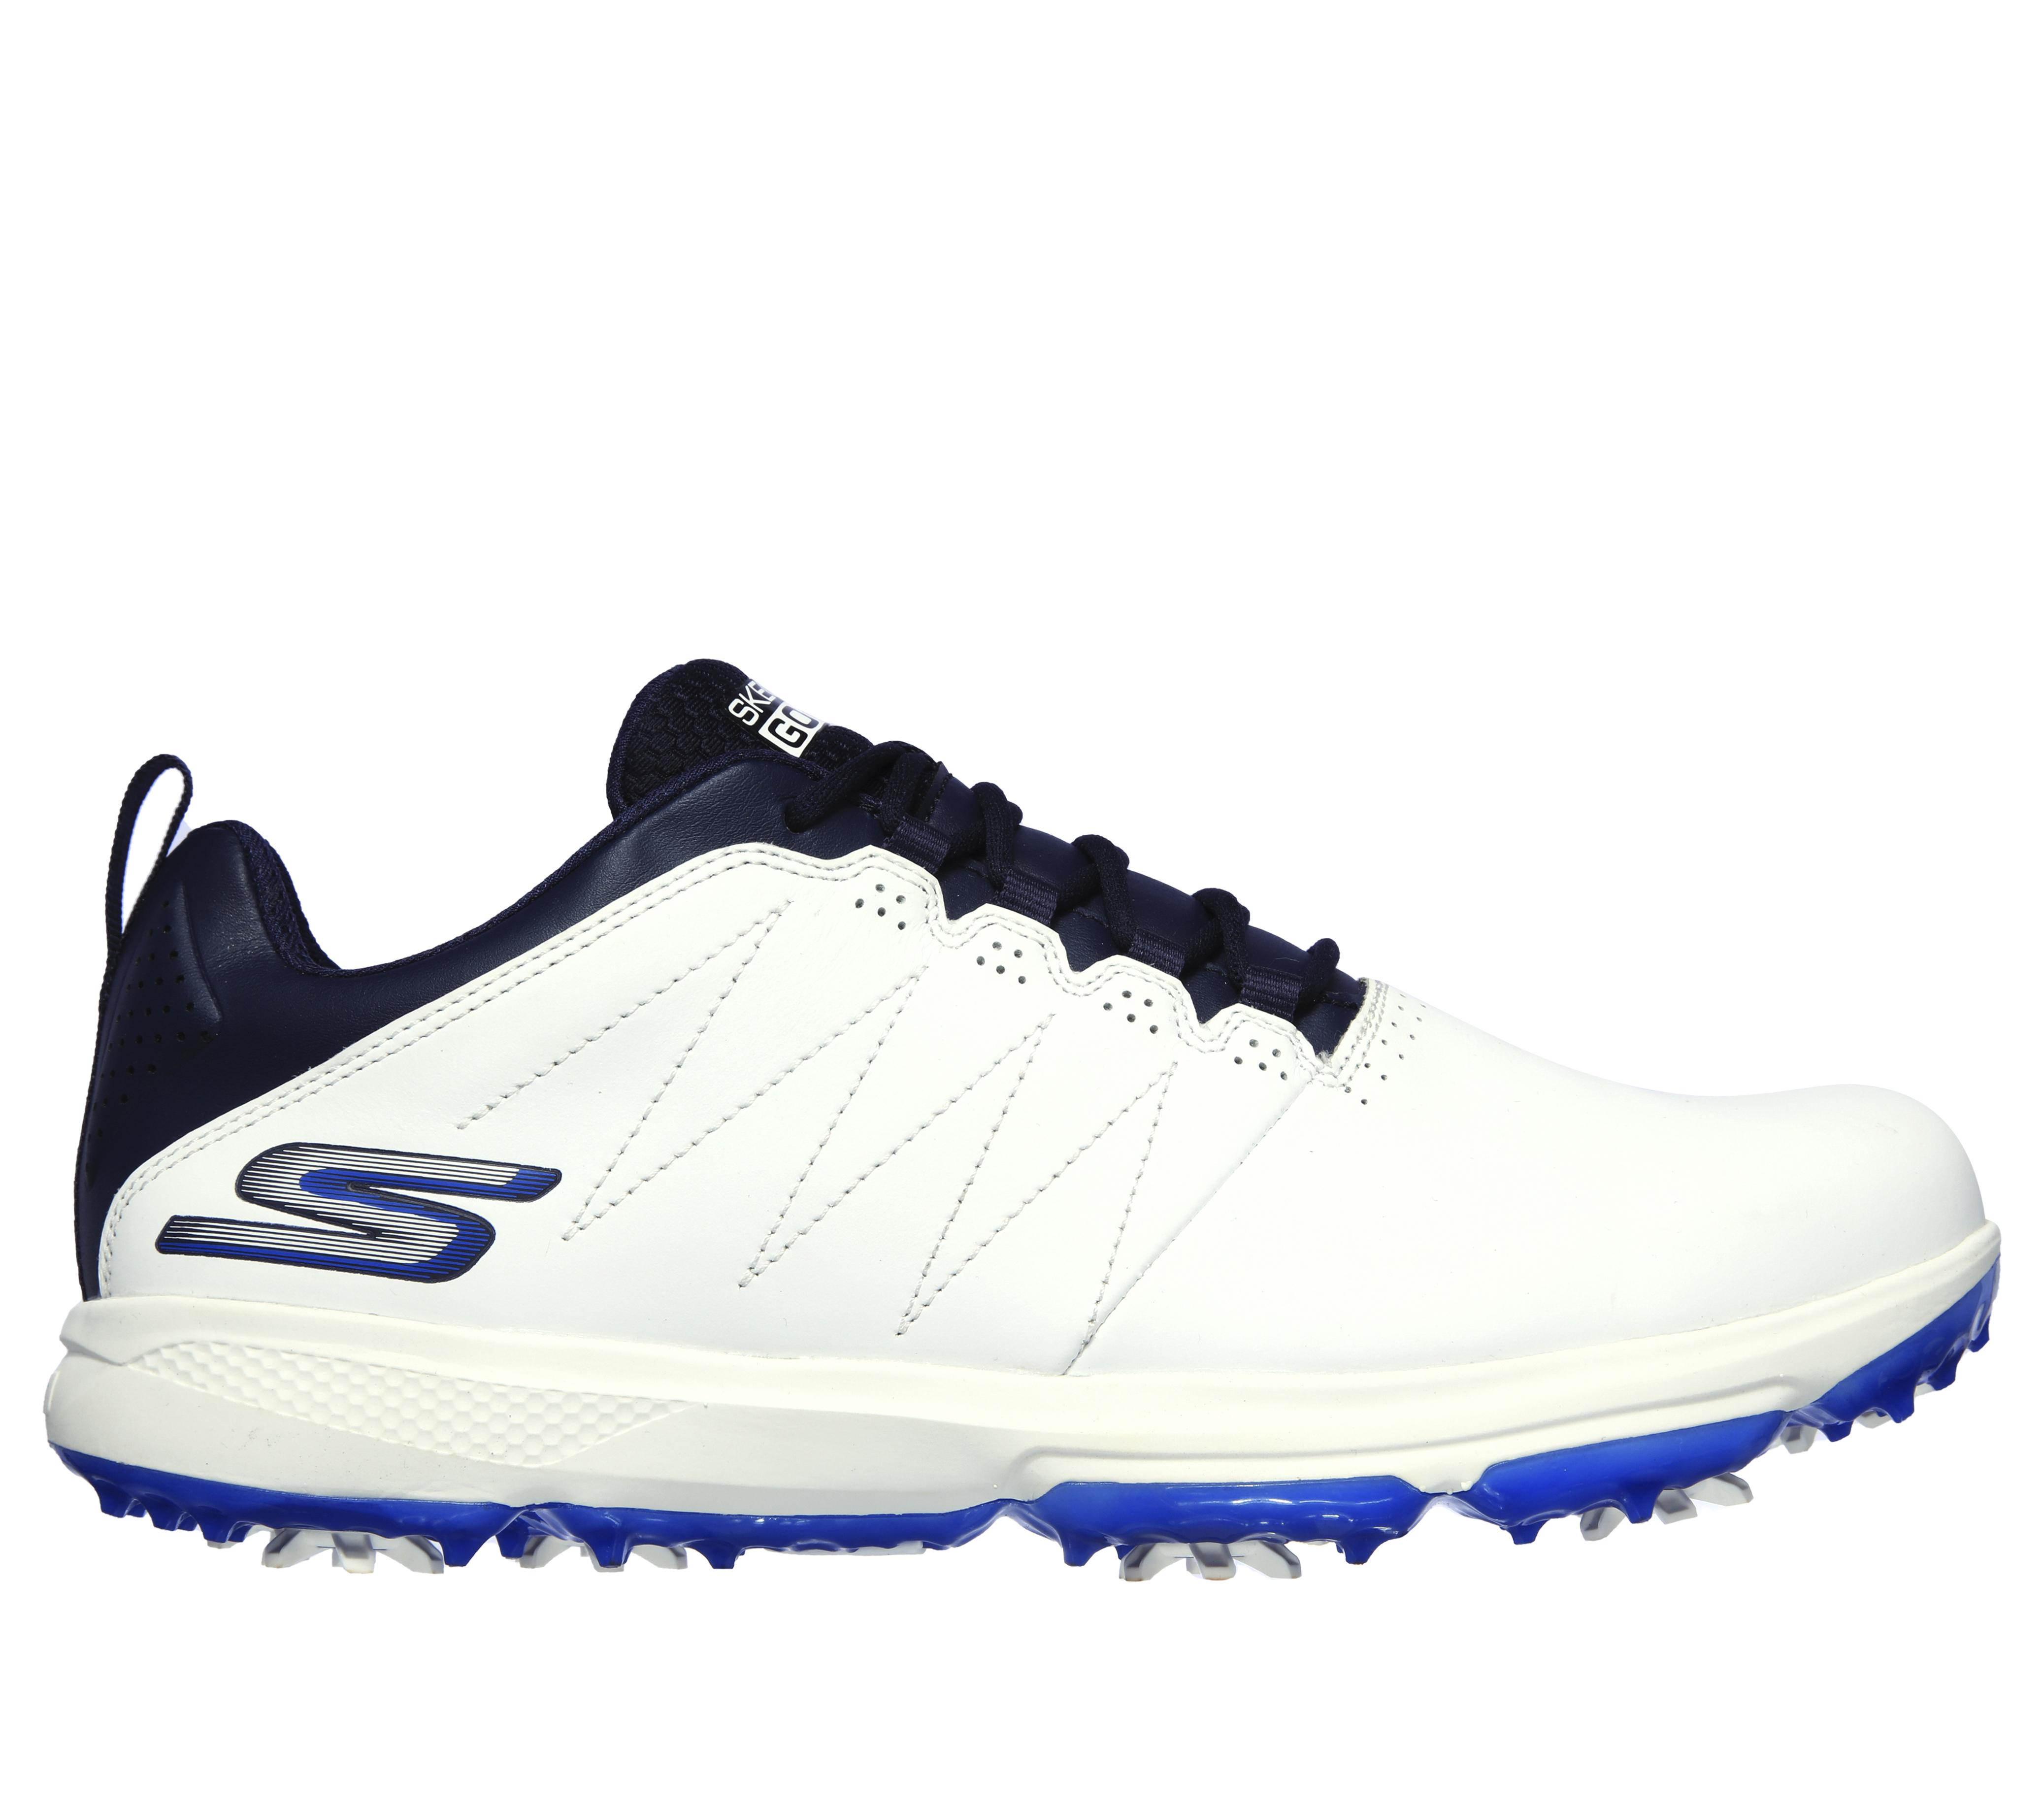 skechers golf shoes stores